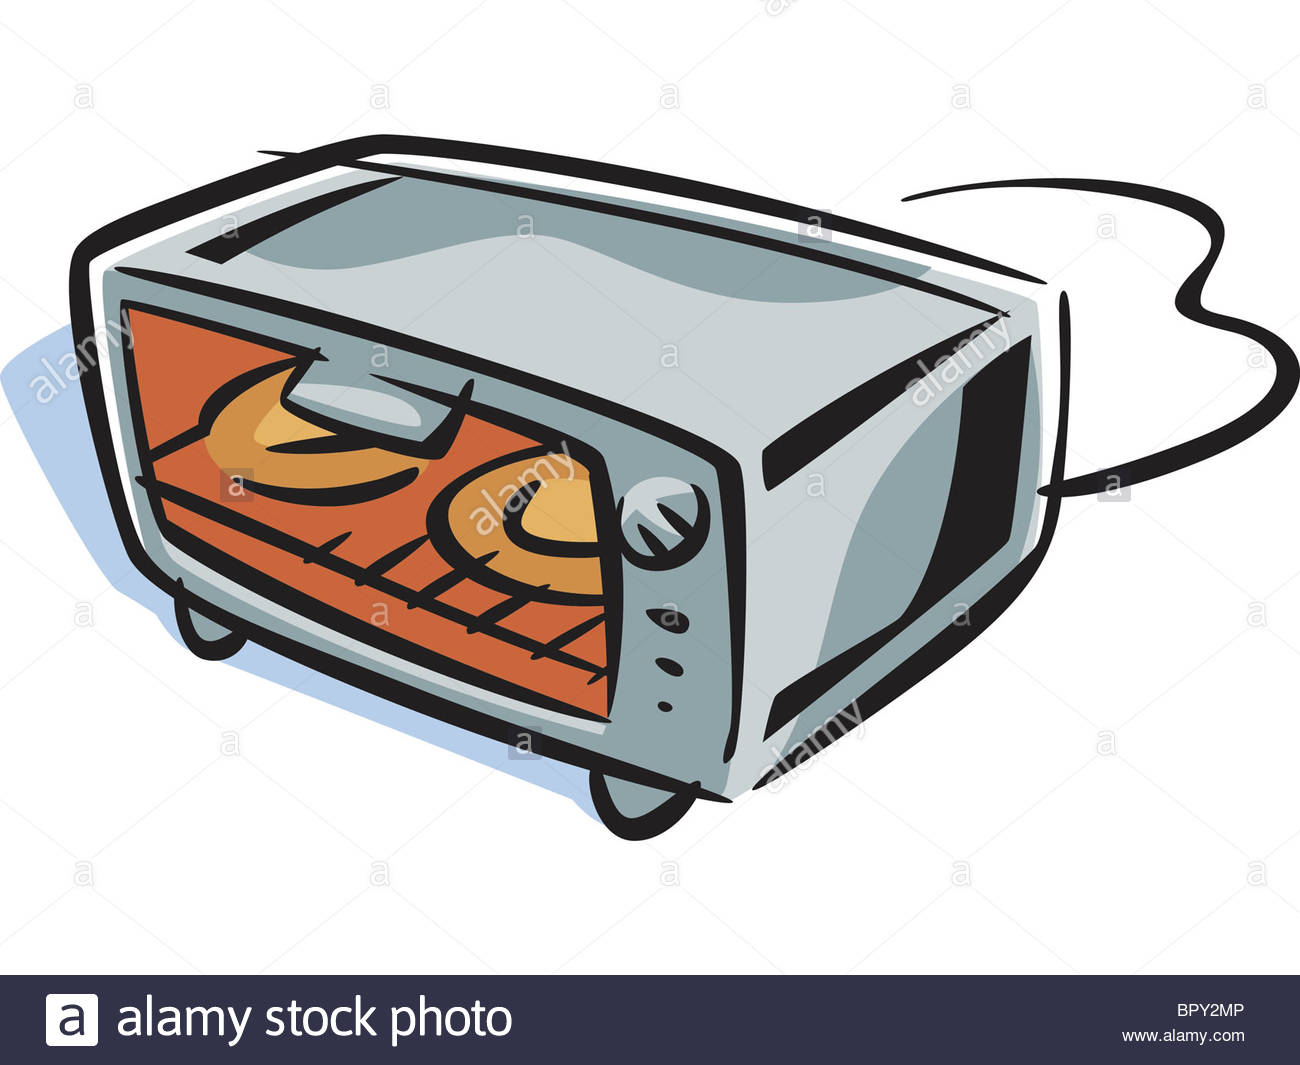 Oven Drawing at GetDrawings Free download